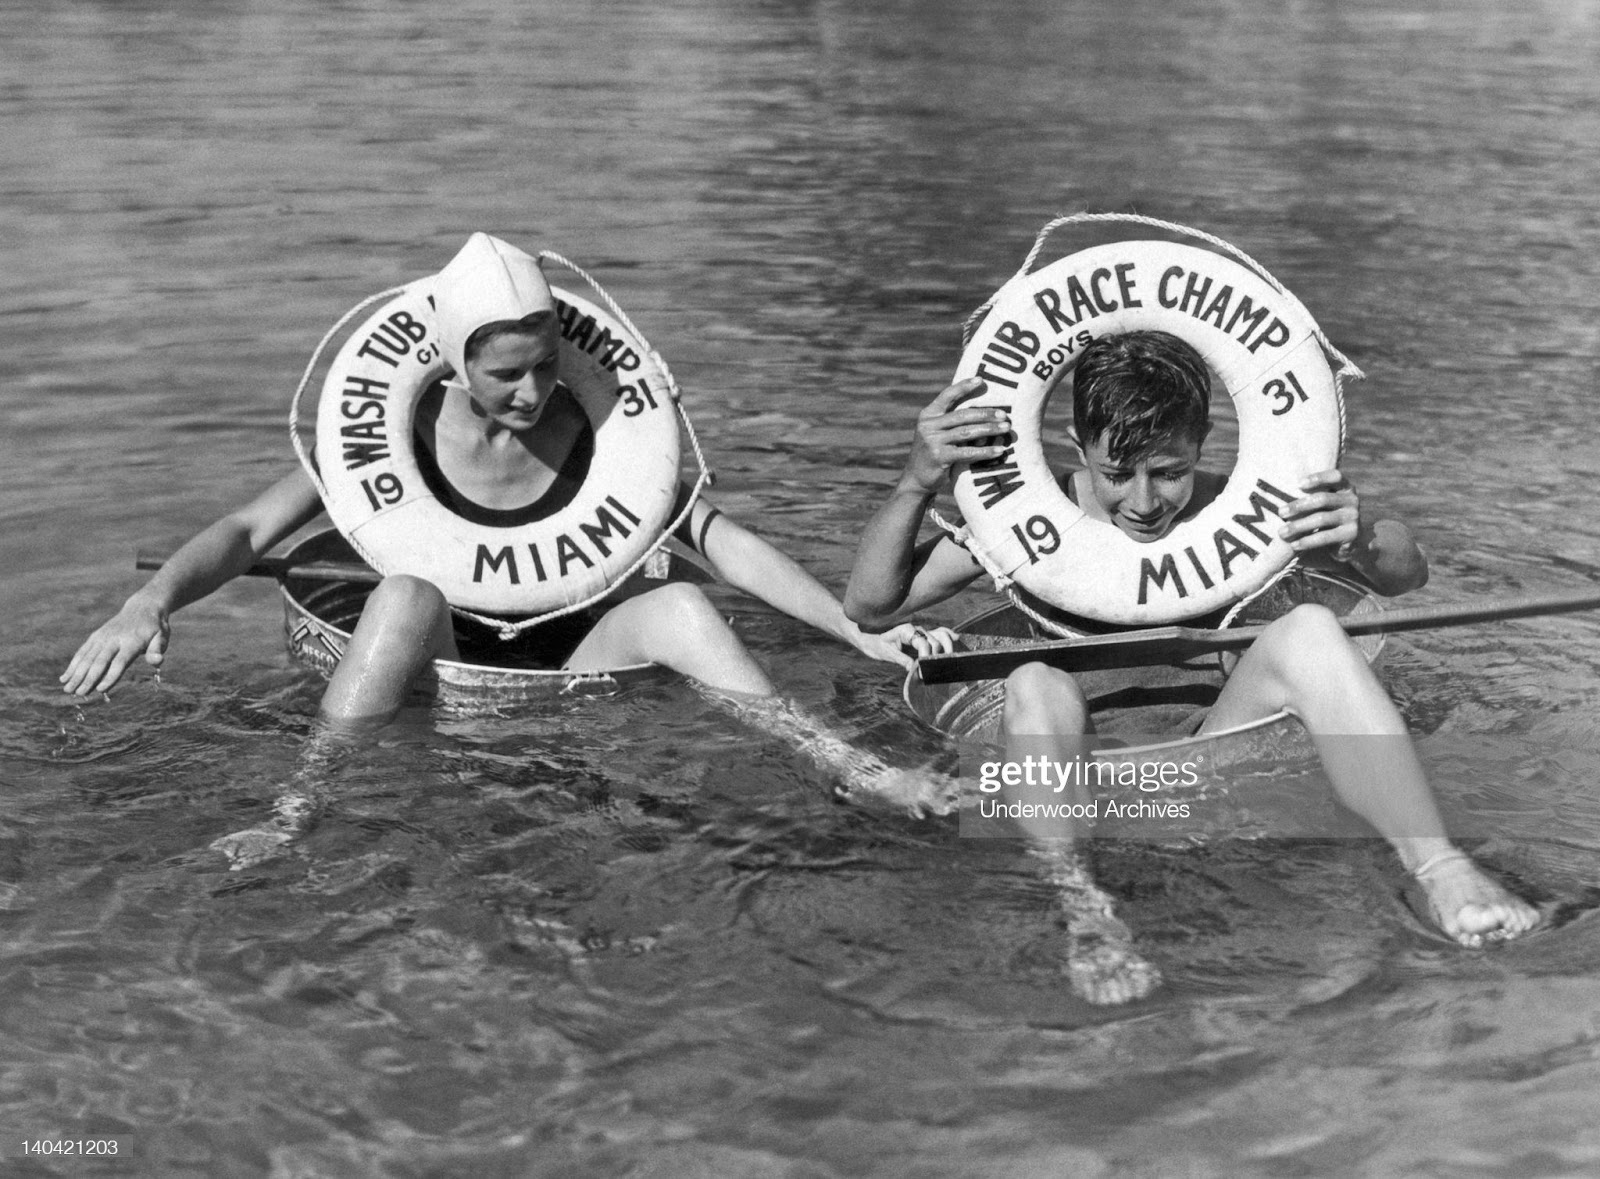 D:\Documenti\posts\posts\Miami\foto\spiagge\the-respective-boy-and-girl-winners-of-the-1931-miami-florida-washtub-picture-id140421203.jpg